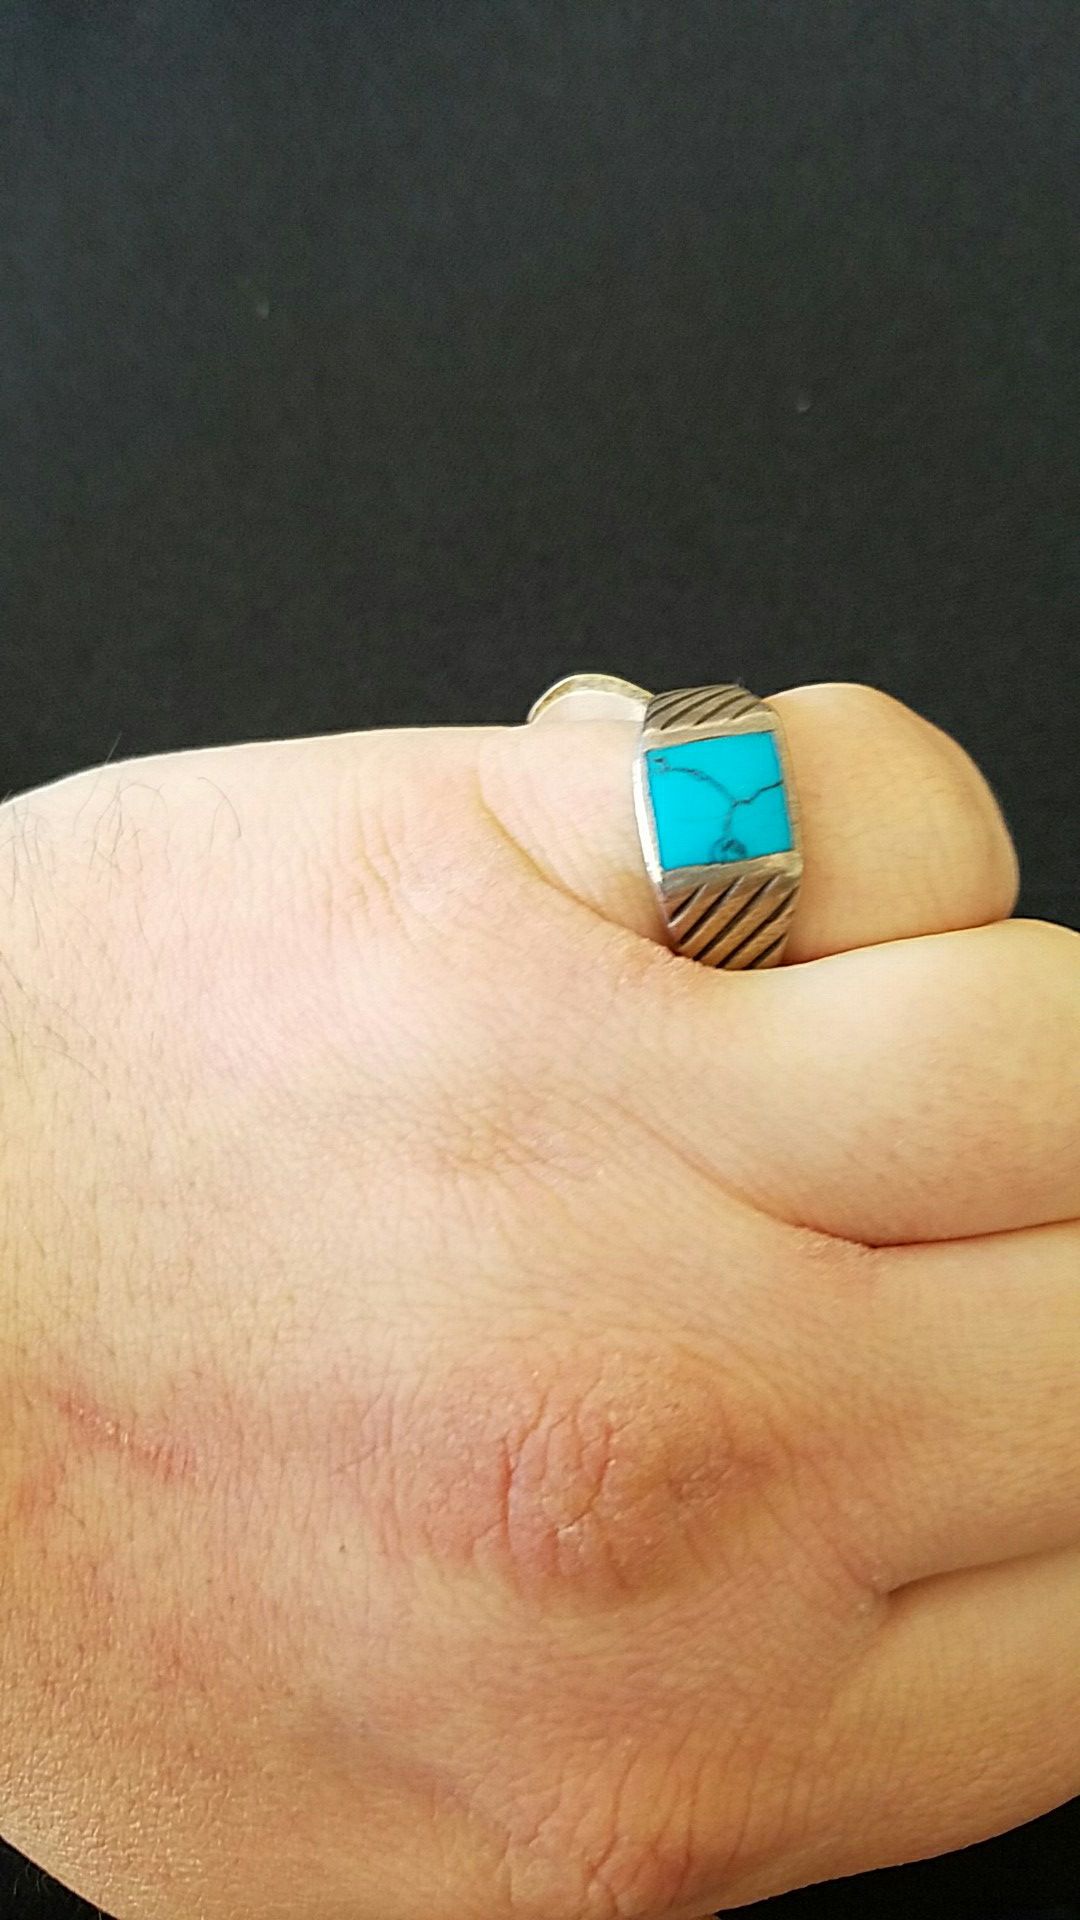 Silver and Turquoise Ring!